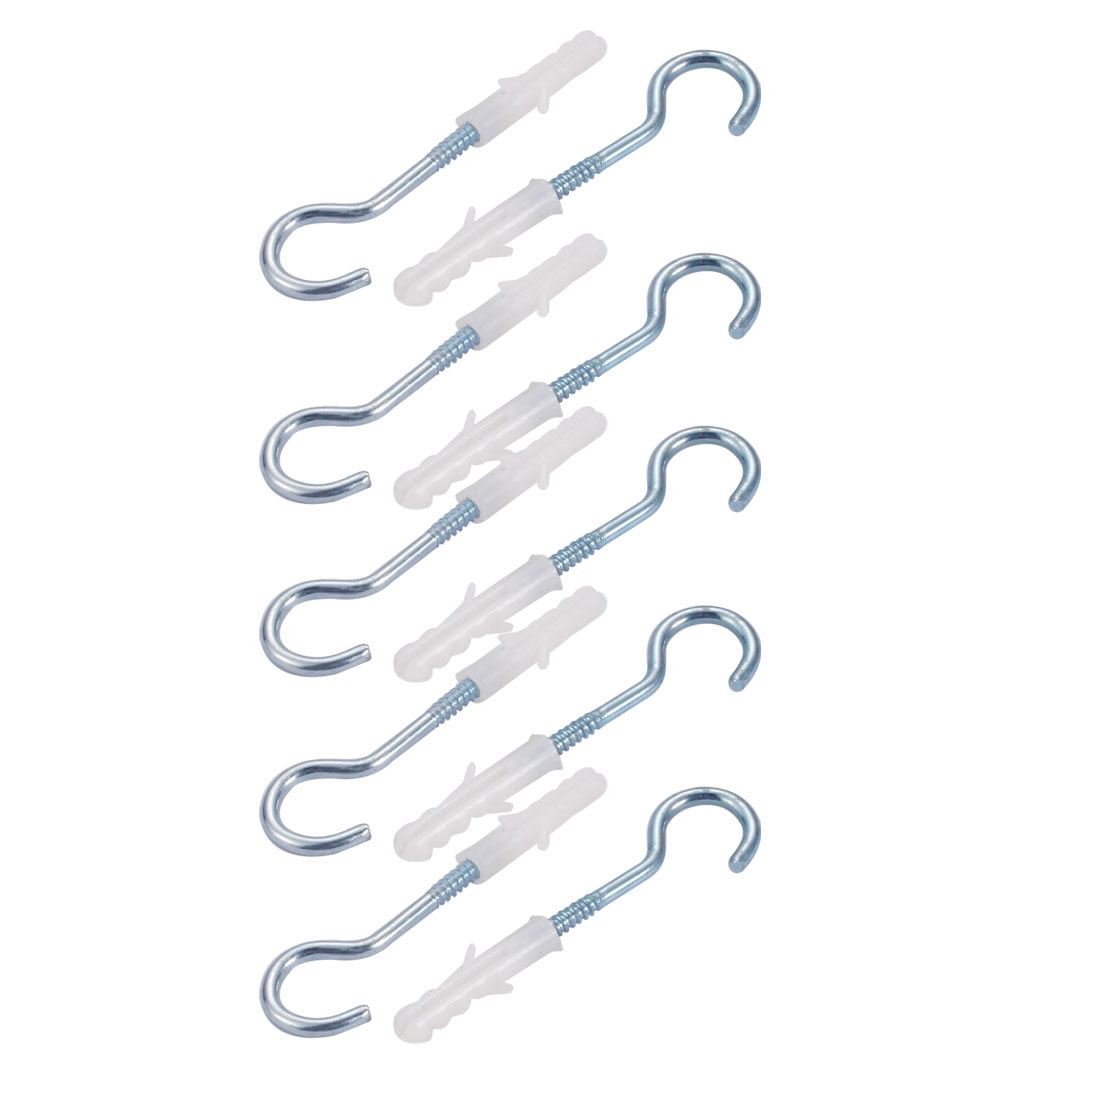 Uxcell 10pcs 6mmx30mm Self Drilling Drywall Anchor With Zinc Plated Screw  Hook Eye 